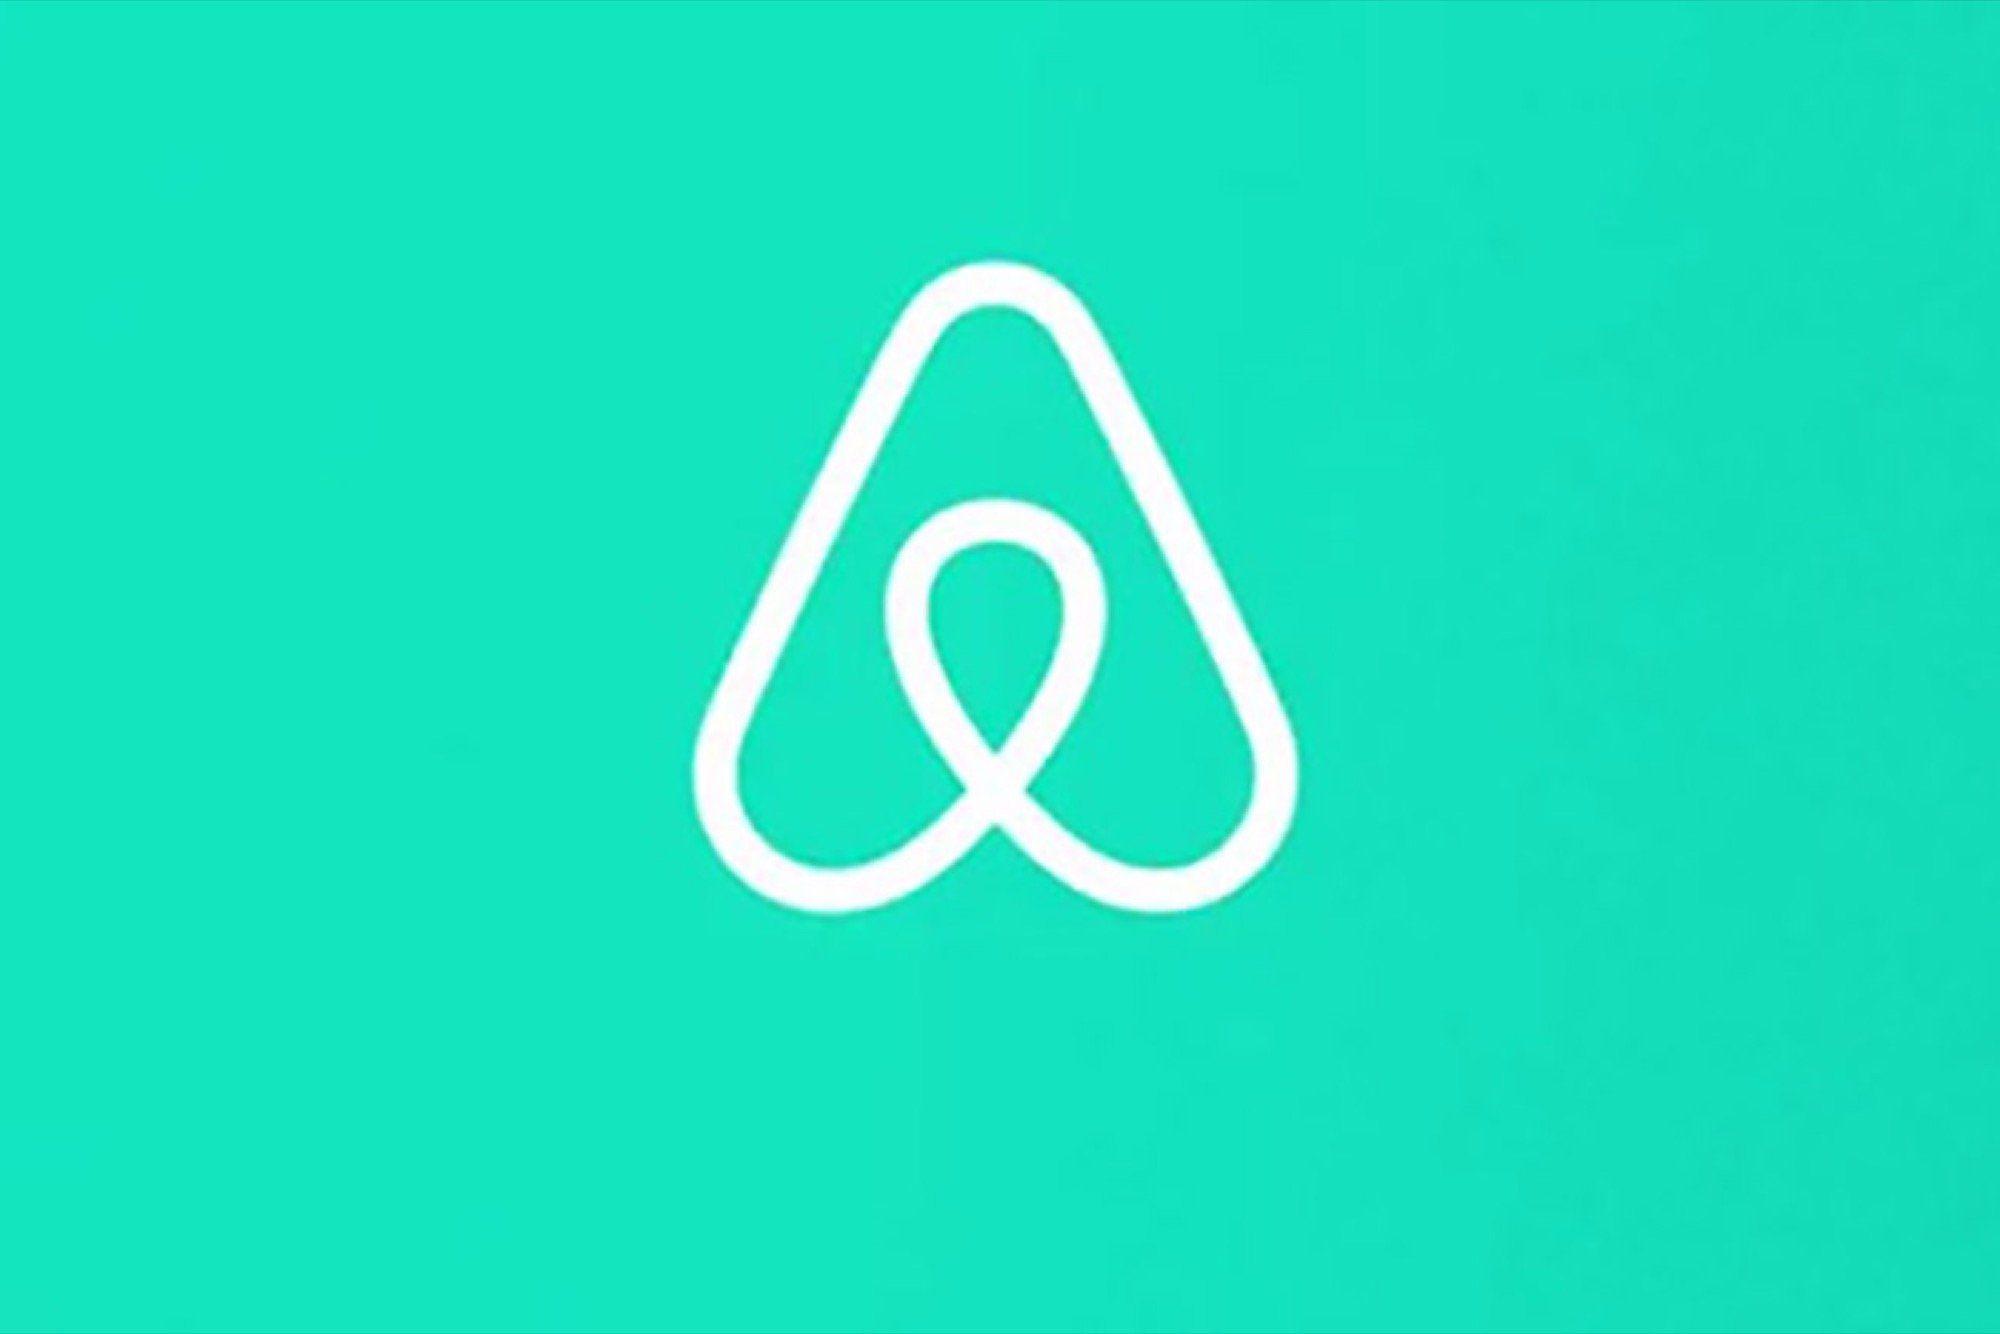 Airbnb New Logo - Love It or Hate It? Airbnb's New Logo Receives Mixed Reactions